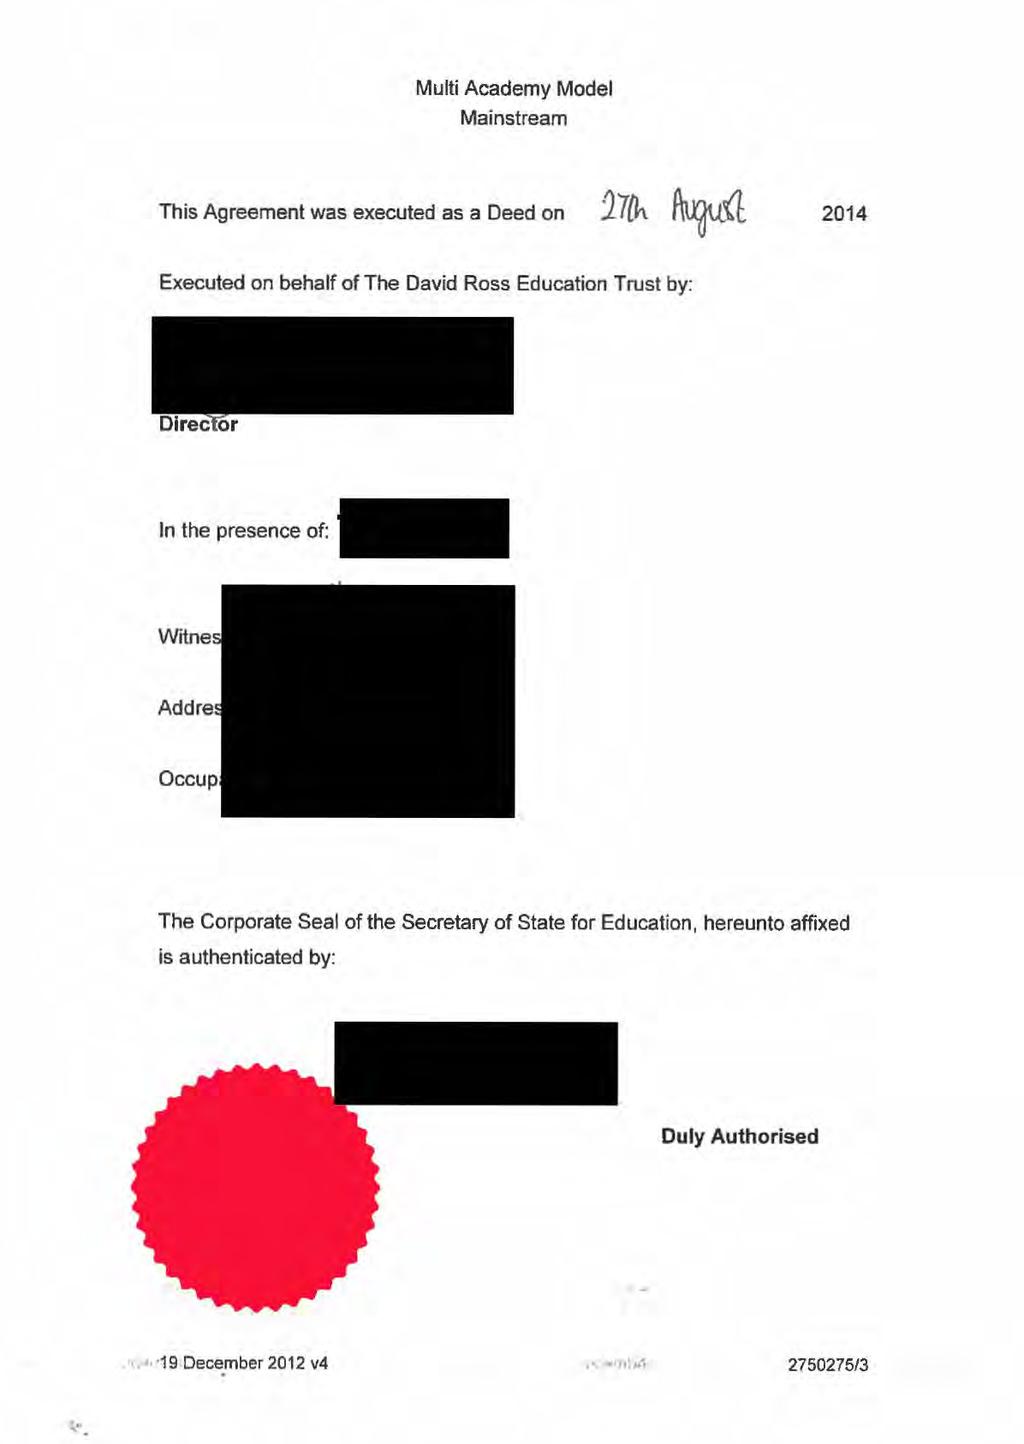 This Agreement was executed as a Deed on 17{h ~ 2014 Executed on behalf of The David Ross Education Trust by: In the presence of: The Corporate